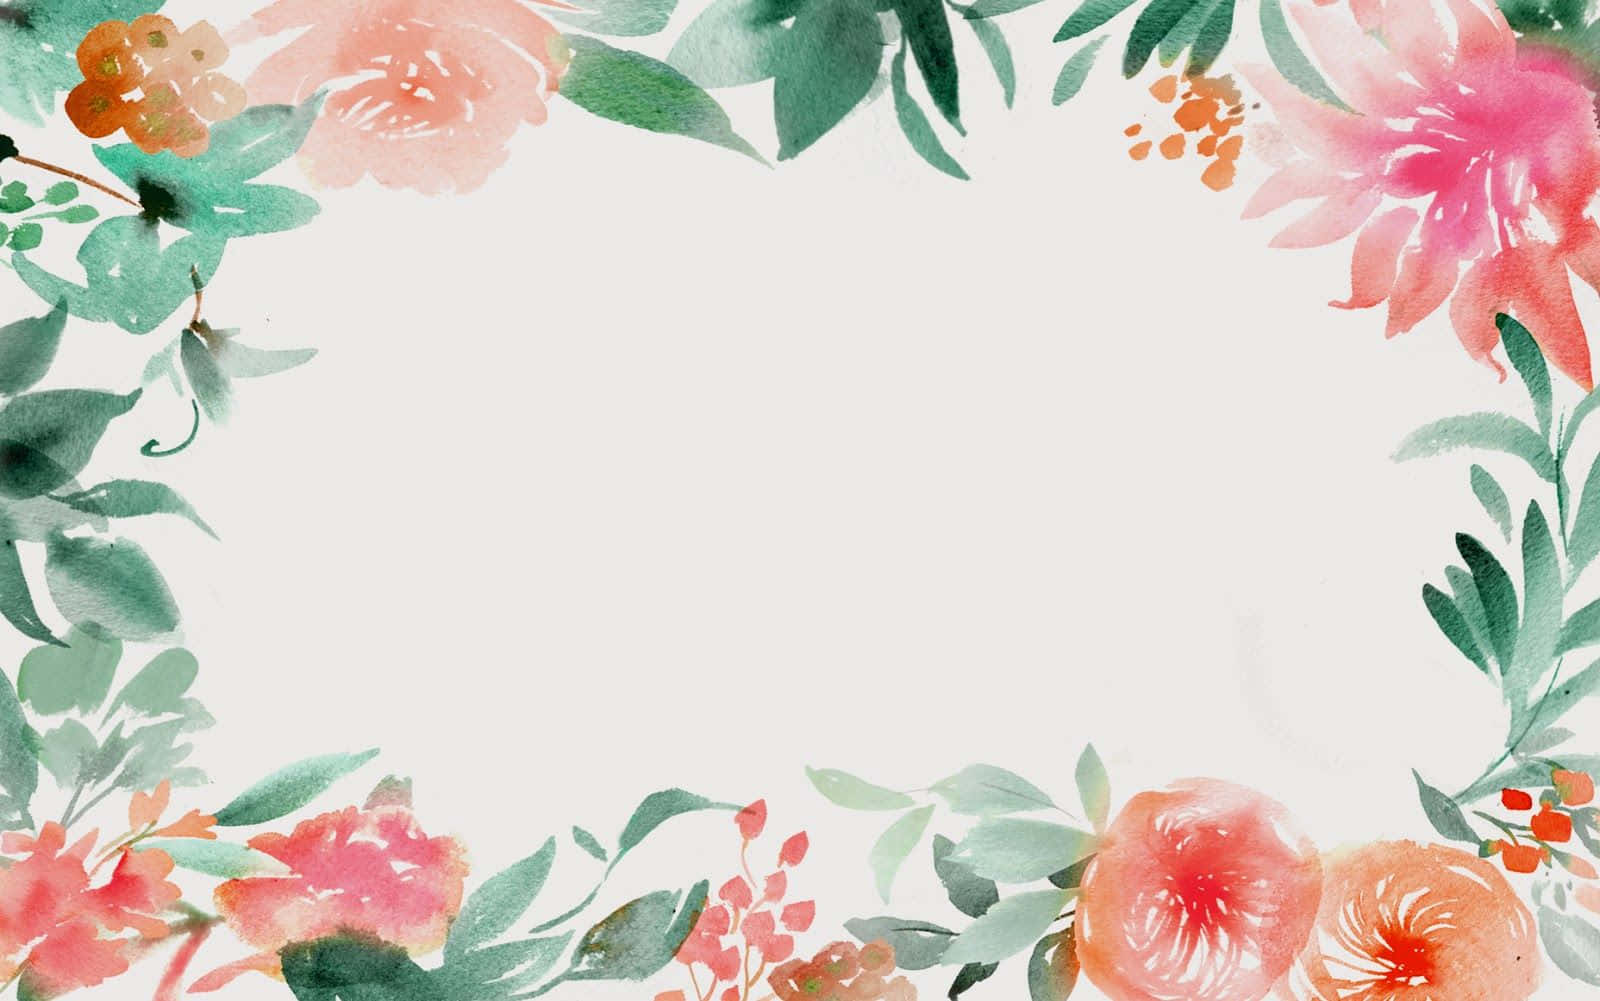 Vibrant Watercolor Floral Background